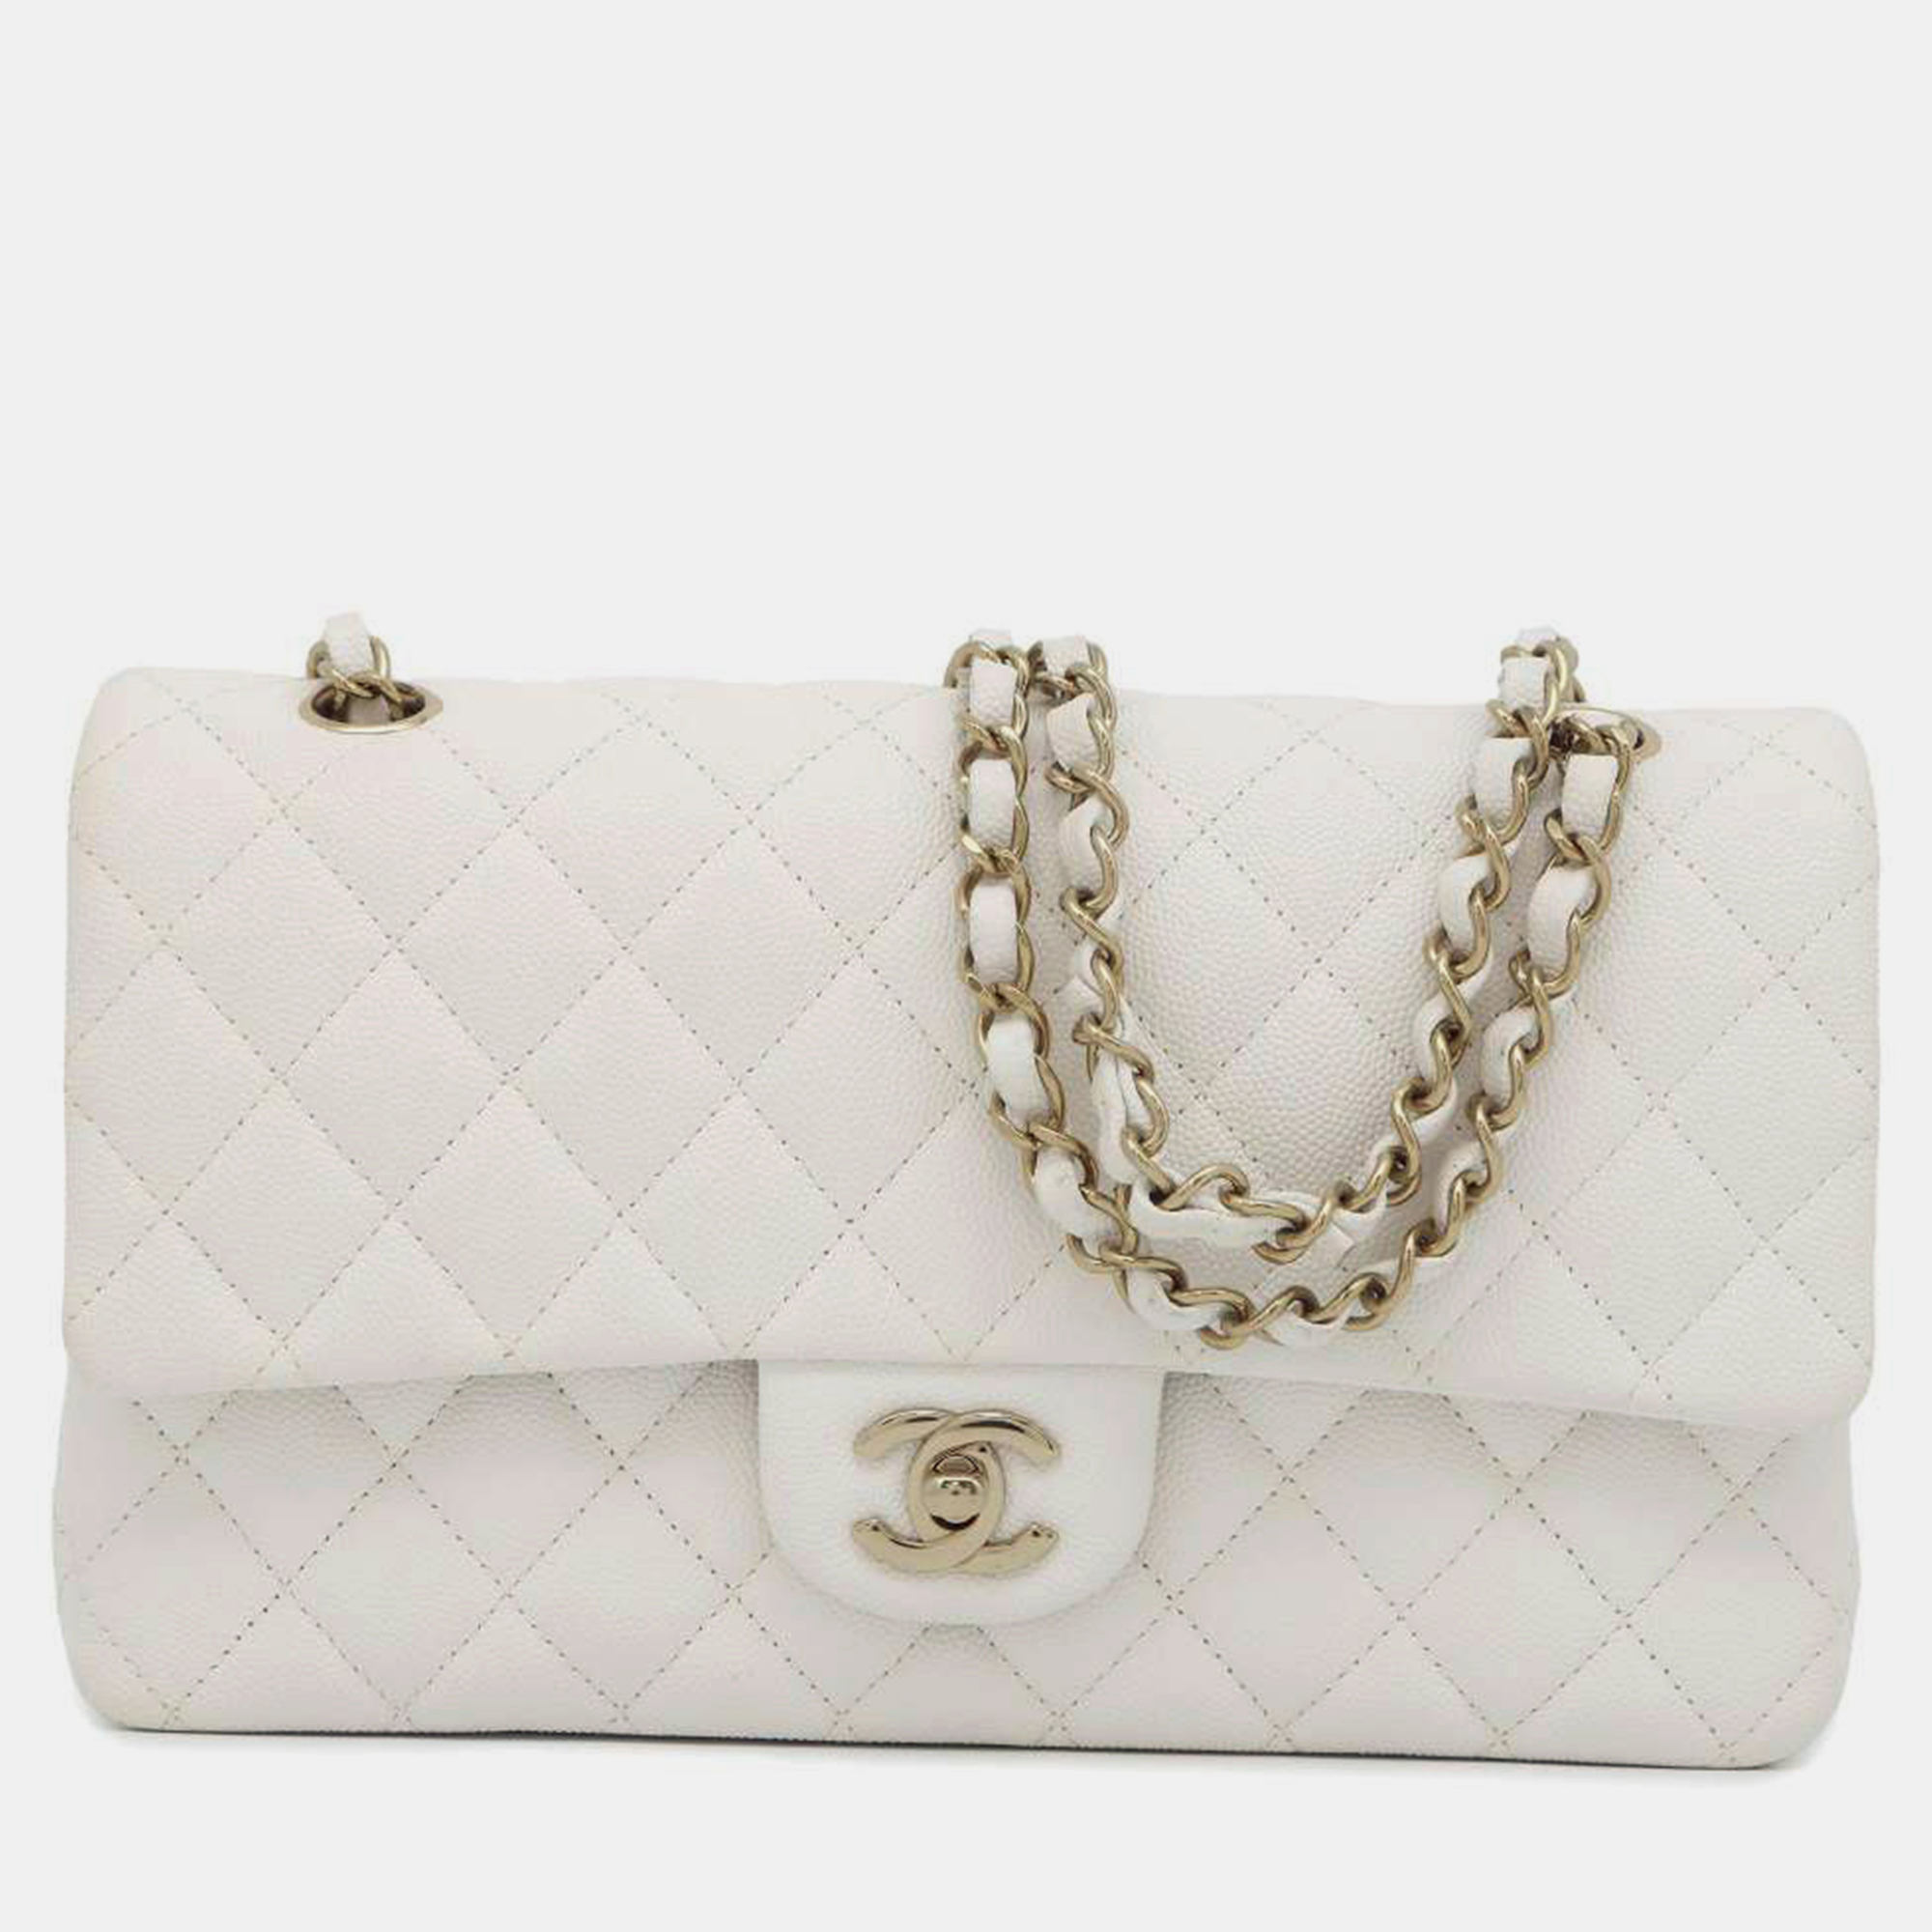 Chanel white leather classic double flap shoulder bag